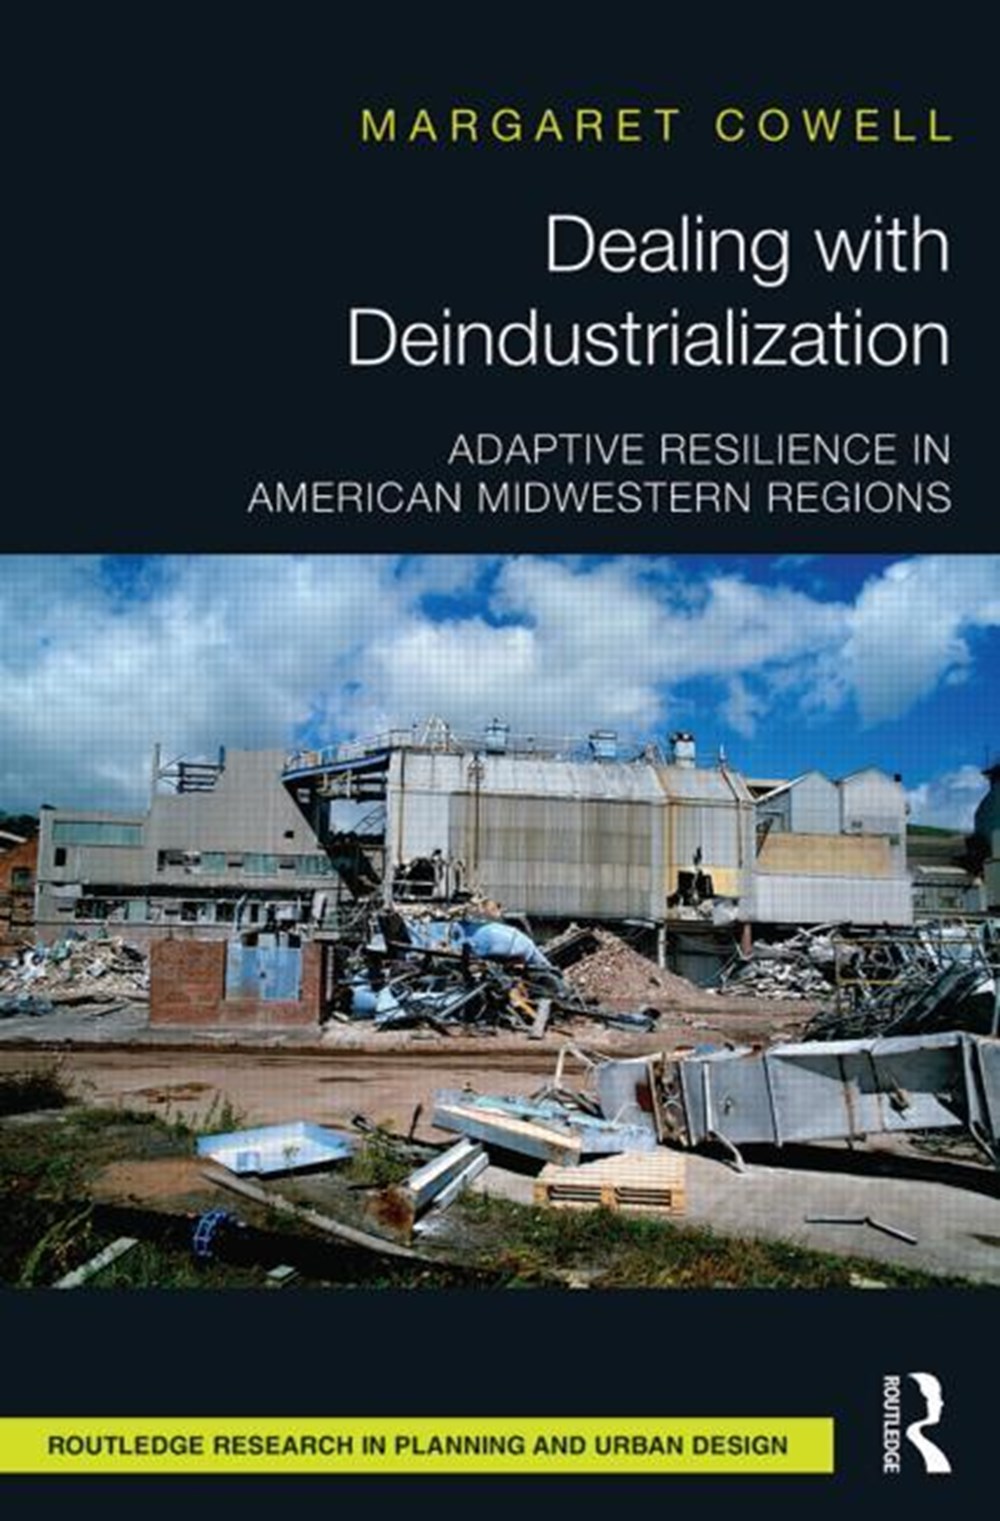 Dealing with Deindustrialization: Adaptive Resilience in American Midwestern Regions